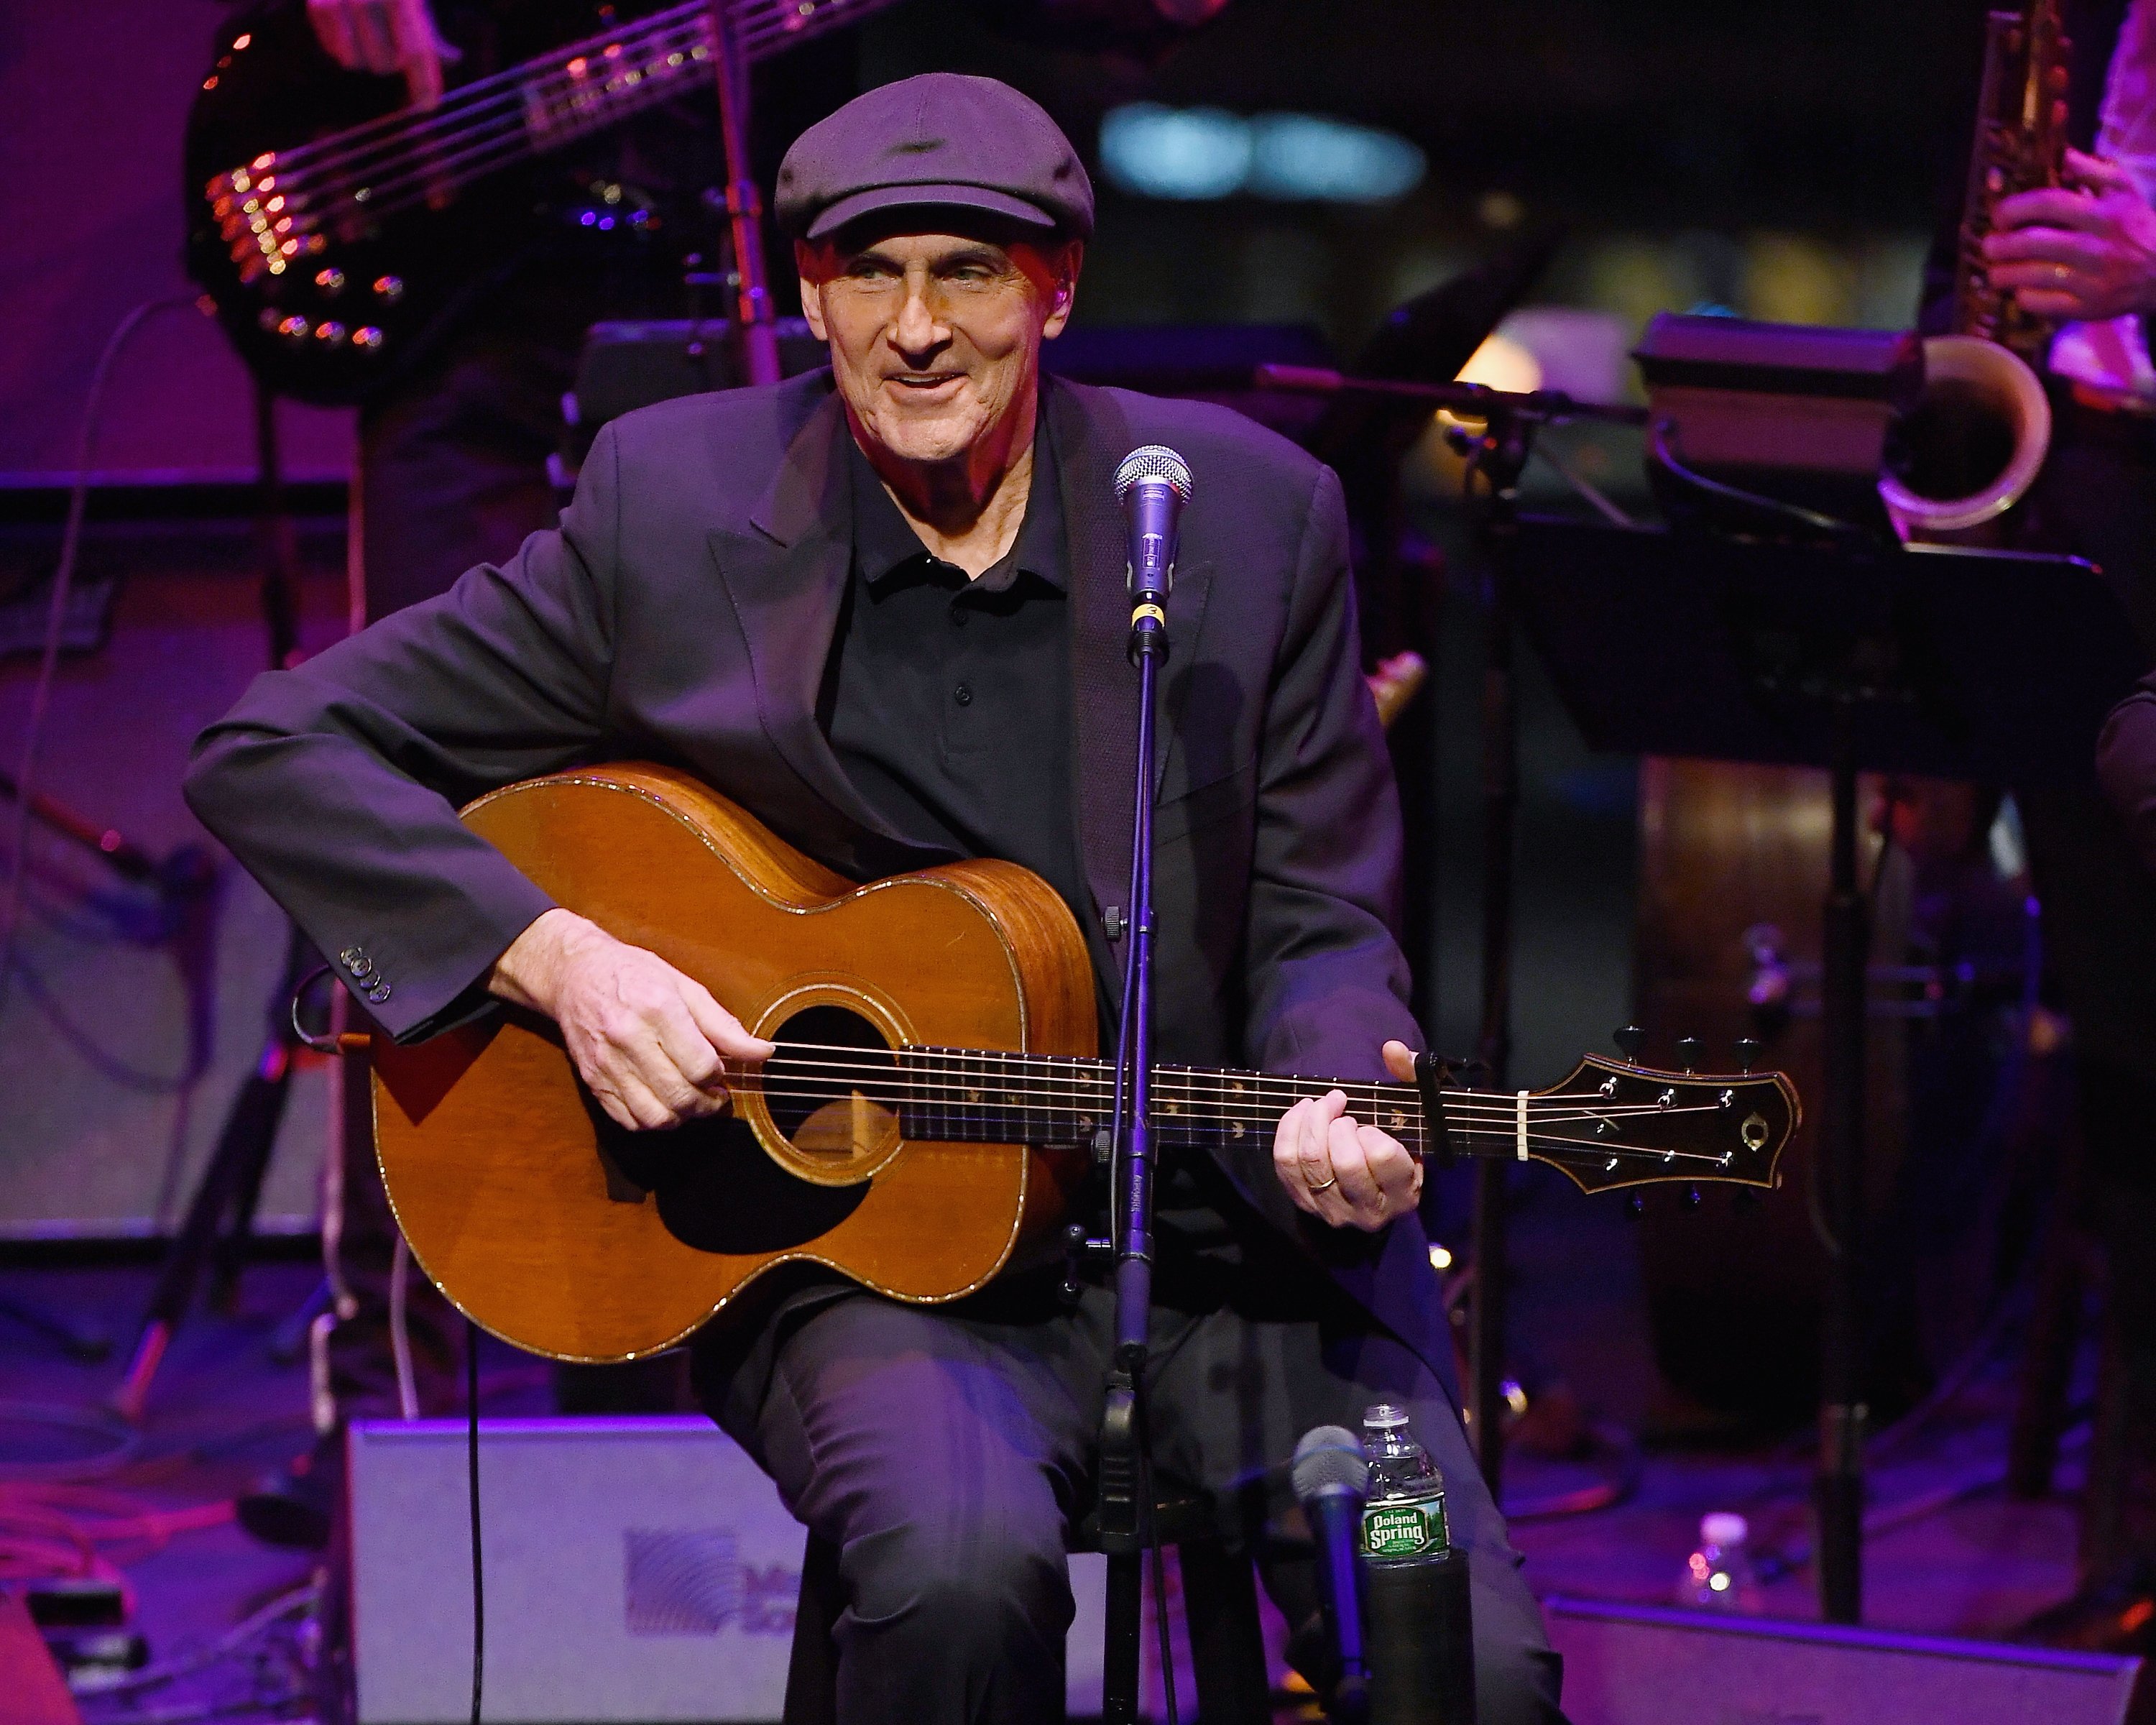 James Taylor performing at an event on January 28, 2019, in New York City | Source: Getty Images